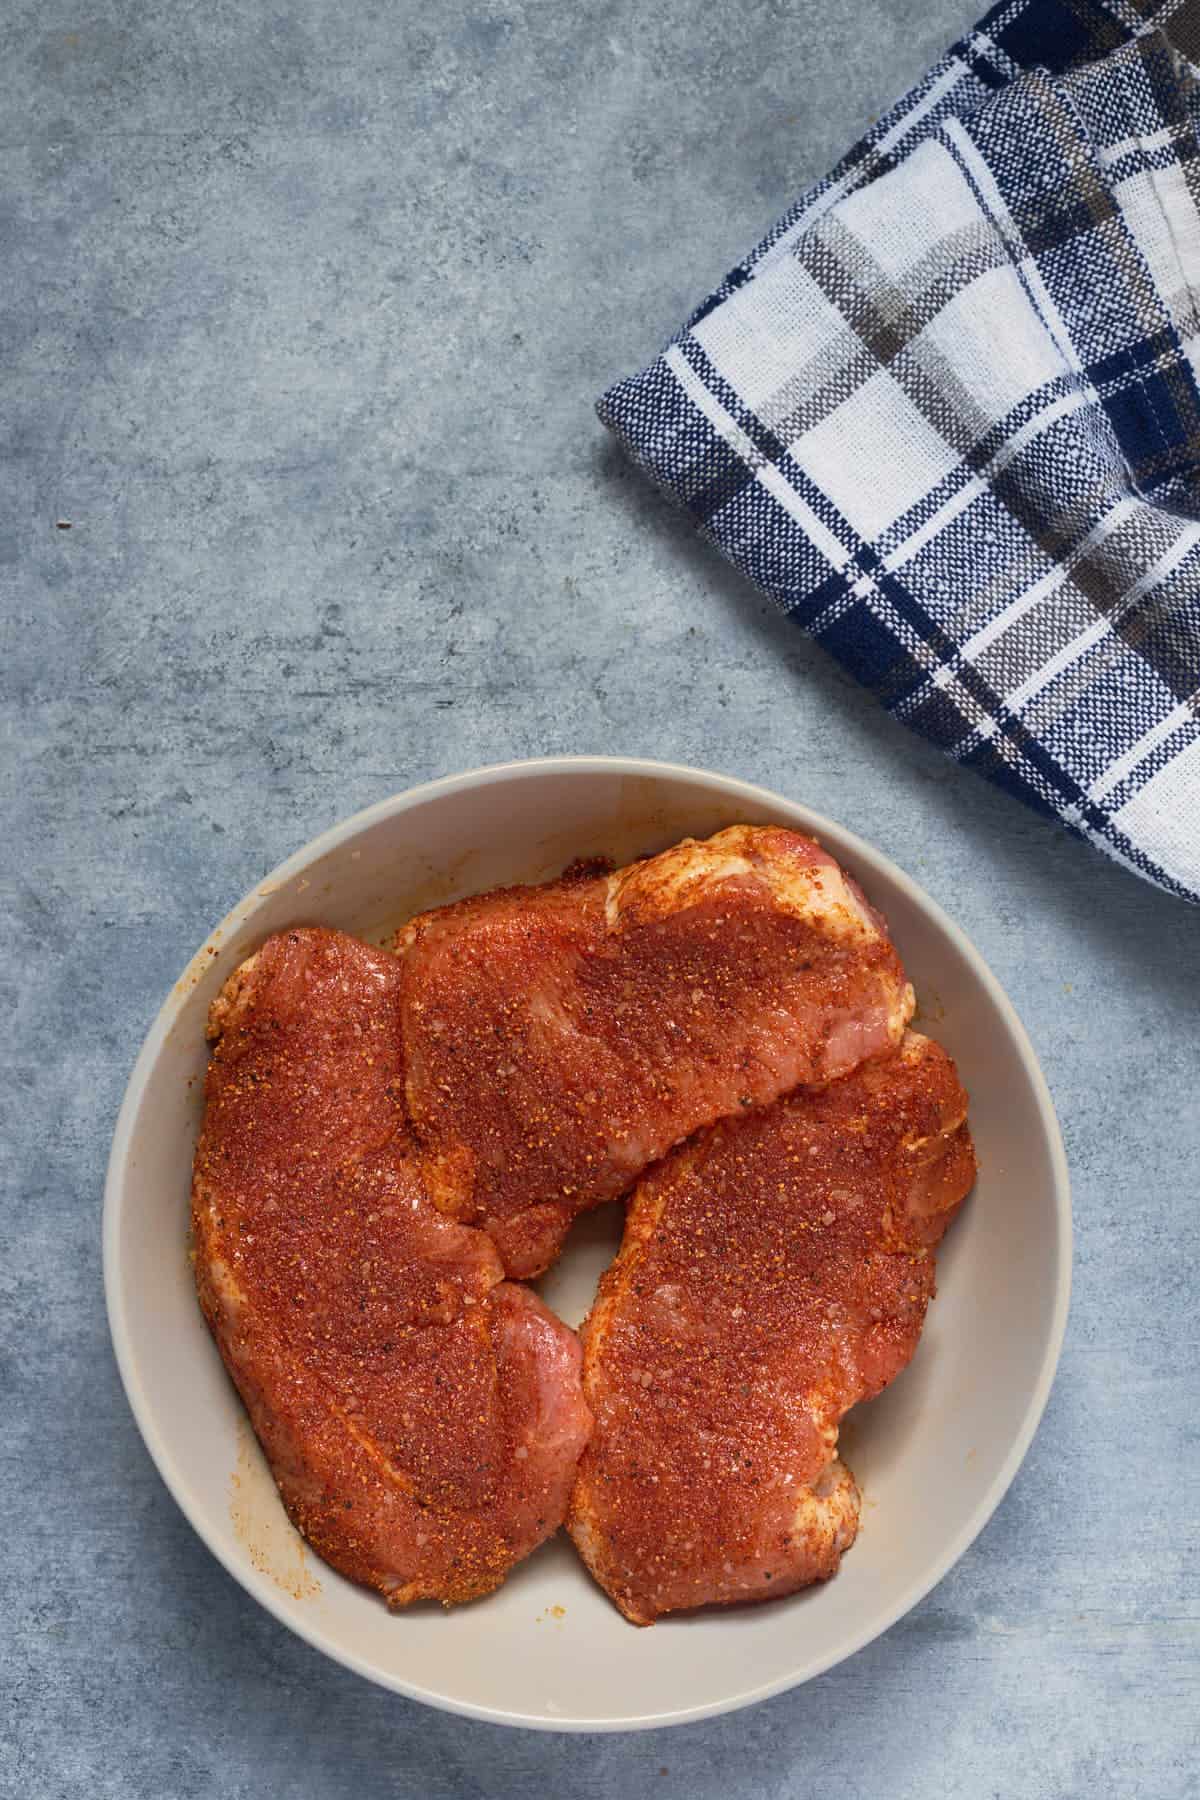 Boneless pork chops sprinkled with oil and rubbed with BBQ seasoning, salt, and pepper.